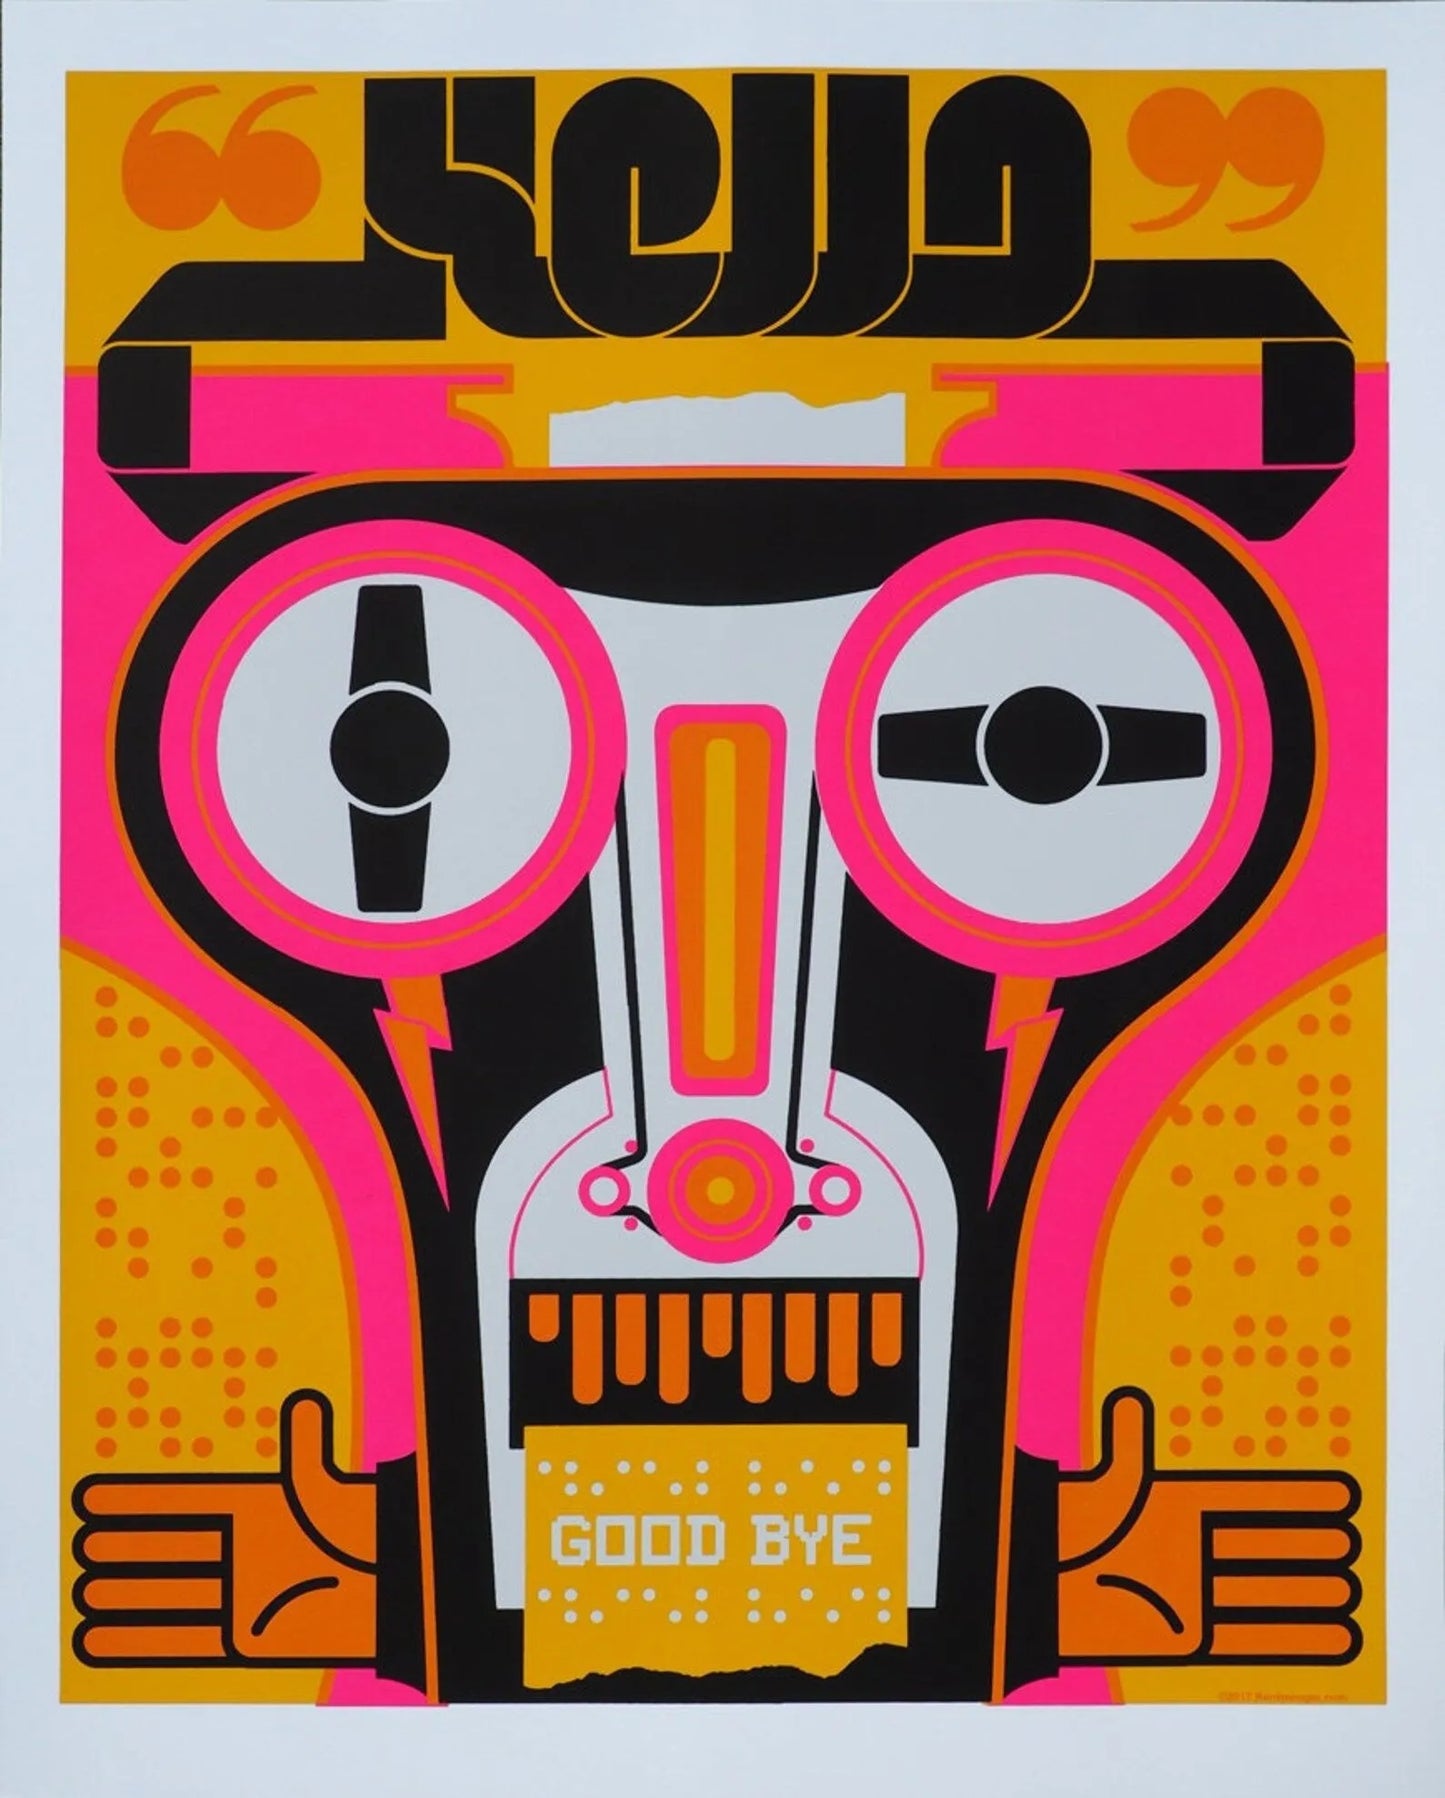 Obsolete Technology Cassette Tape Poster in bright colors hand silk Screened by artist Nerdmonger at Rebel Girl Rampage